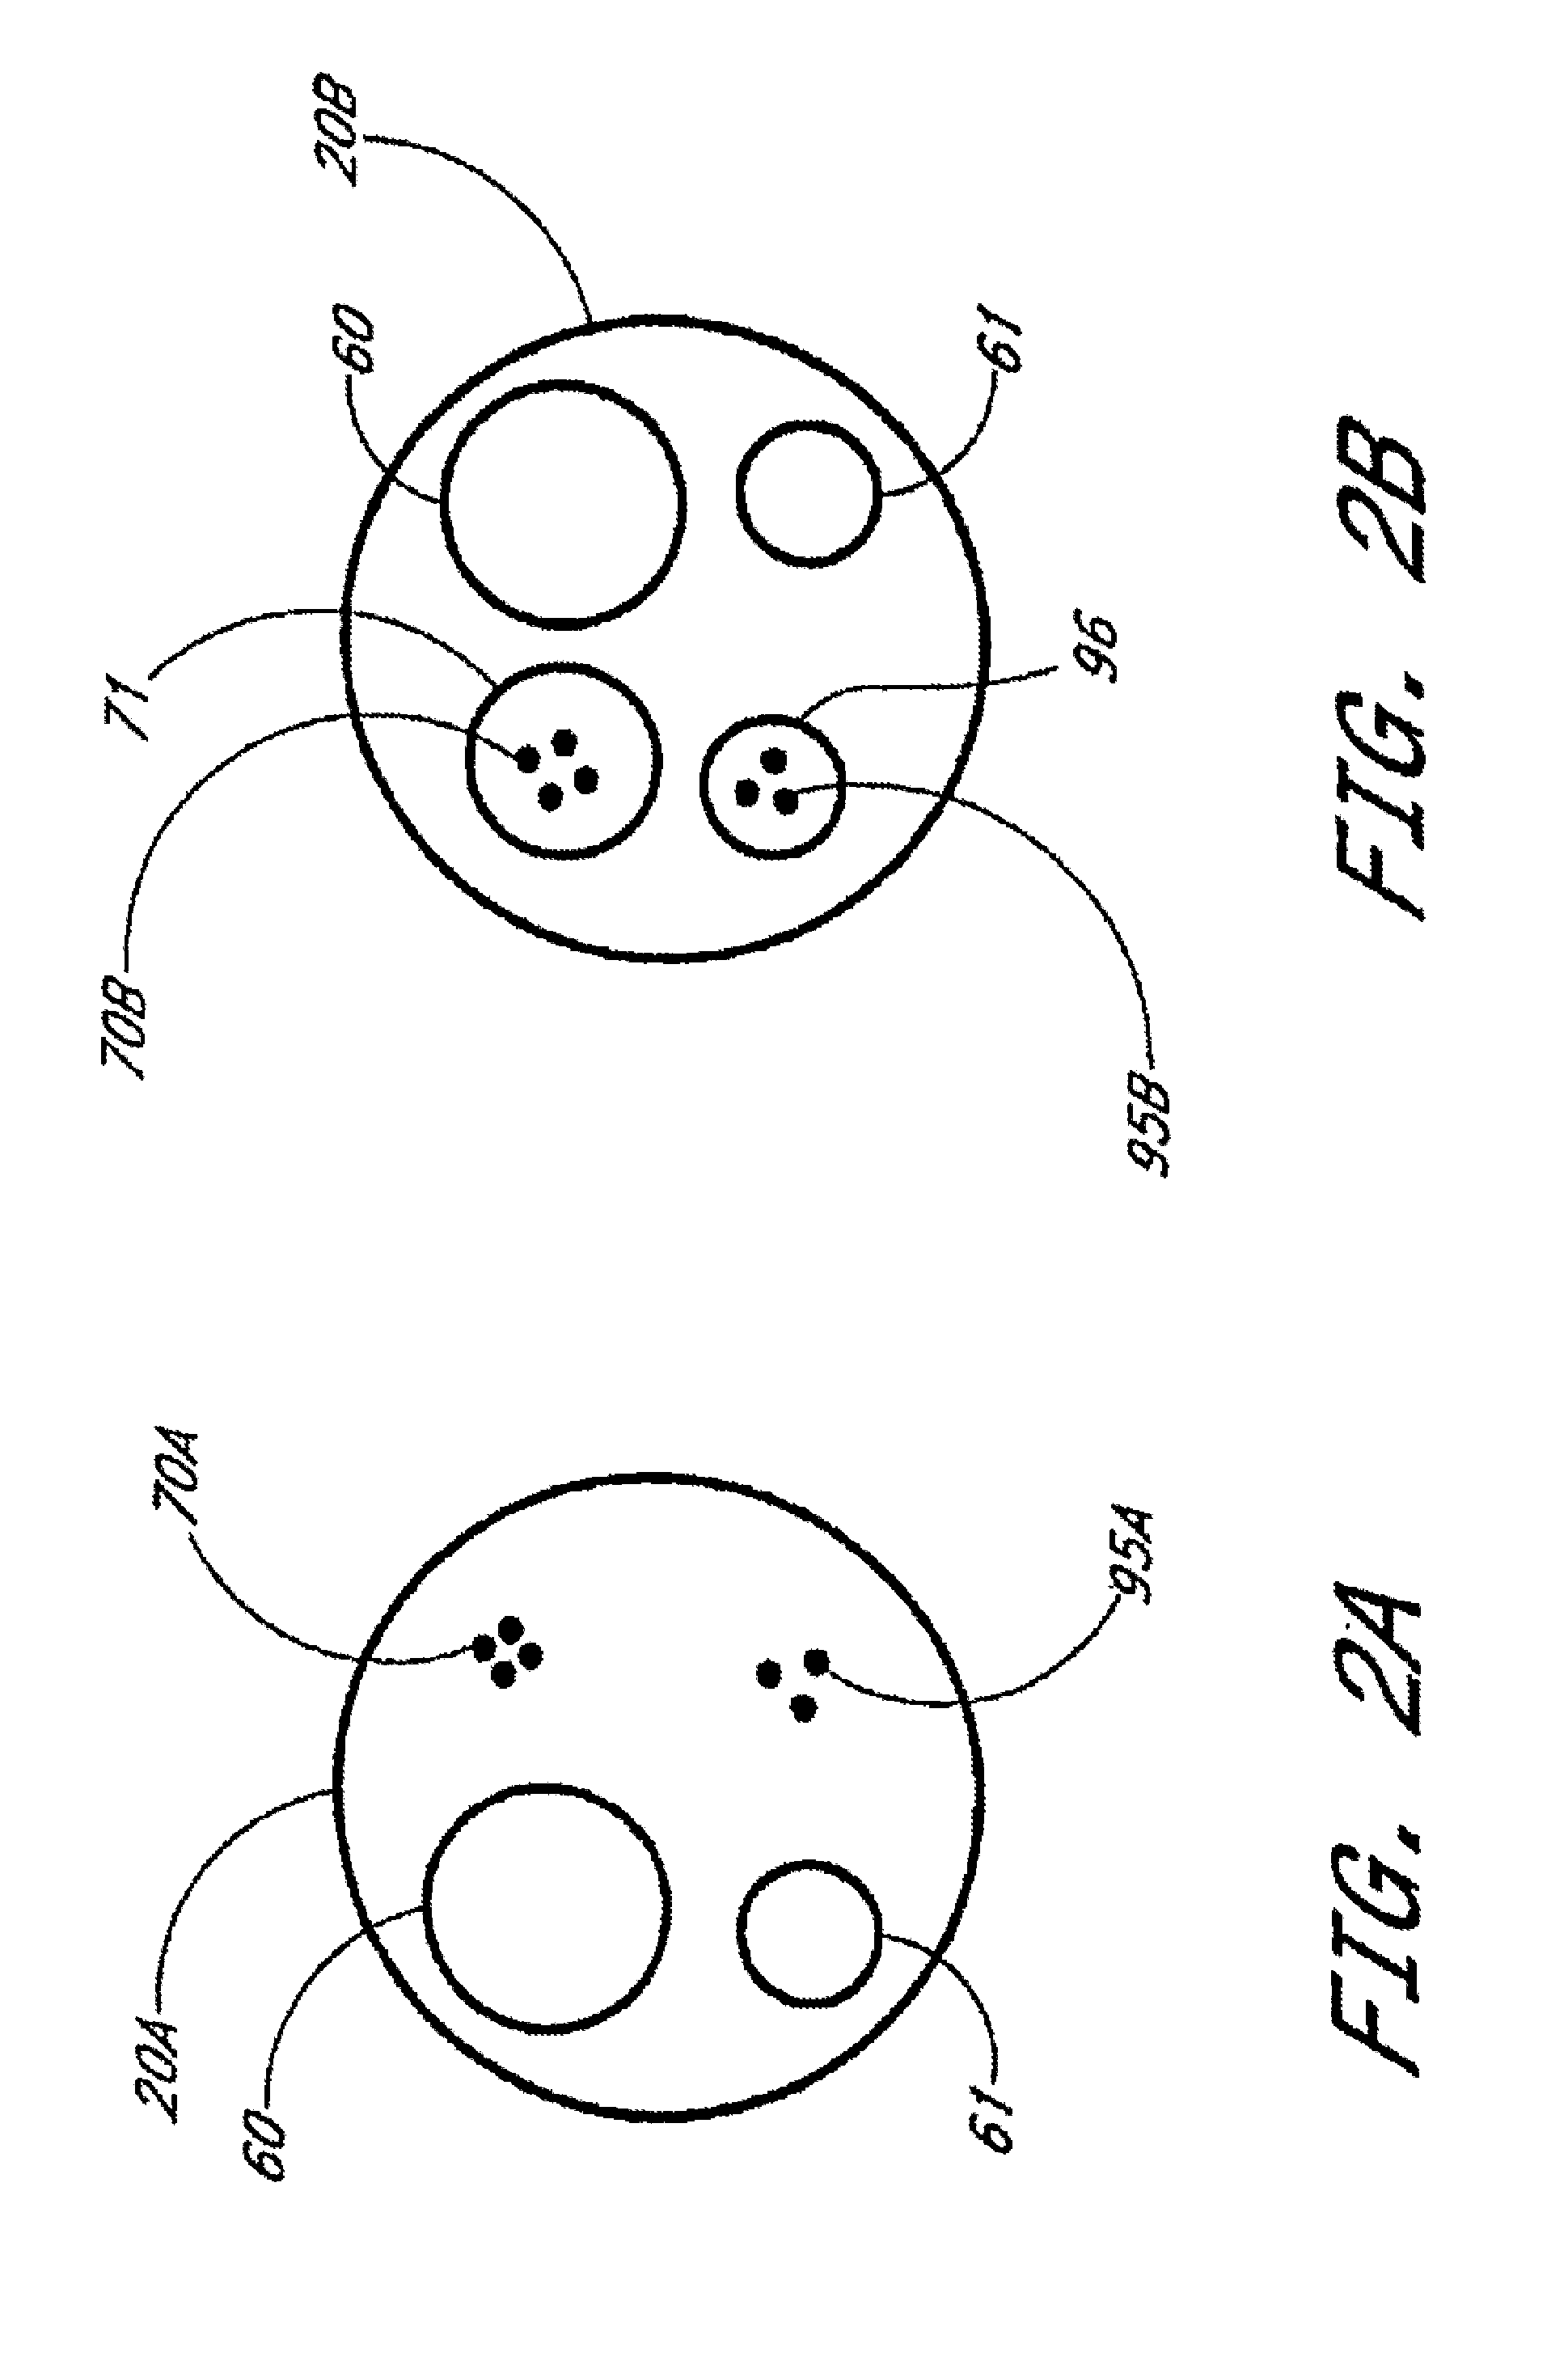 Systems and methods for determining vessel compliance